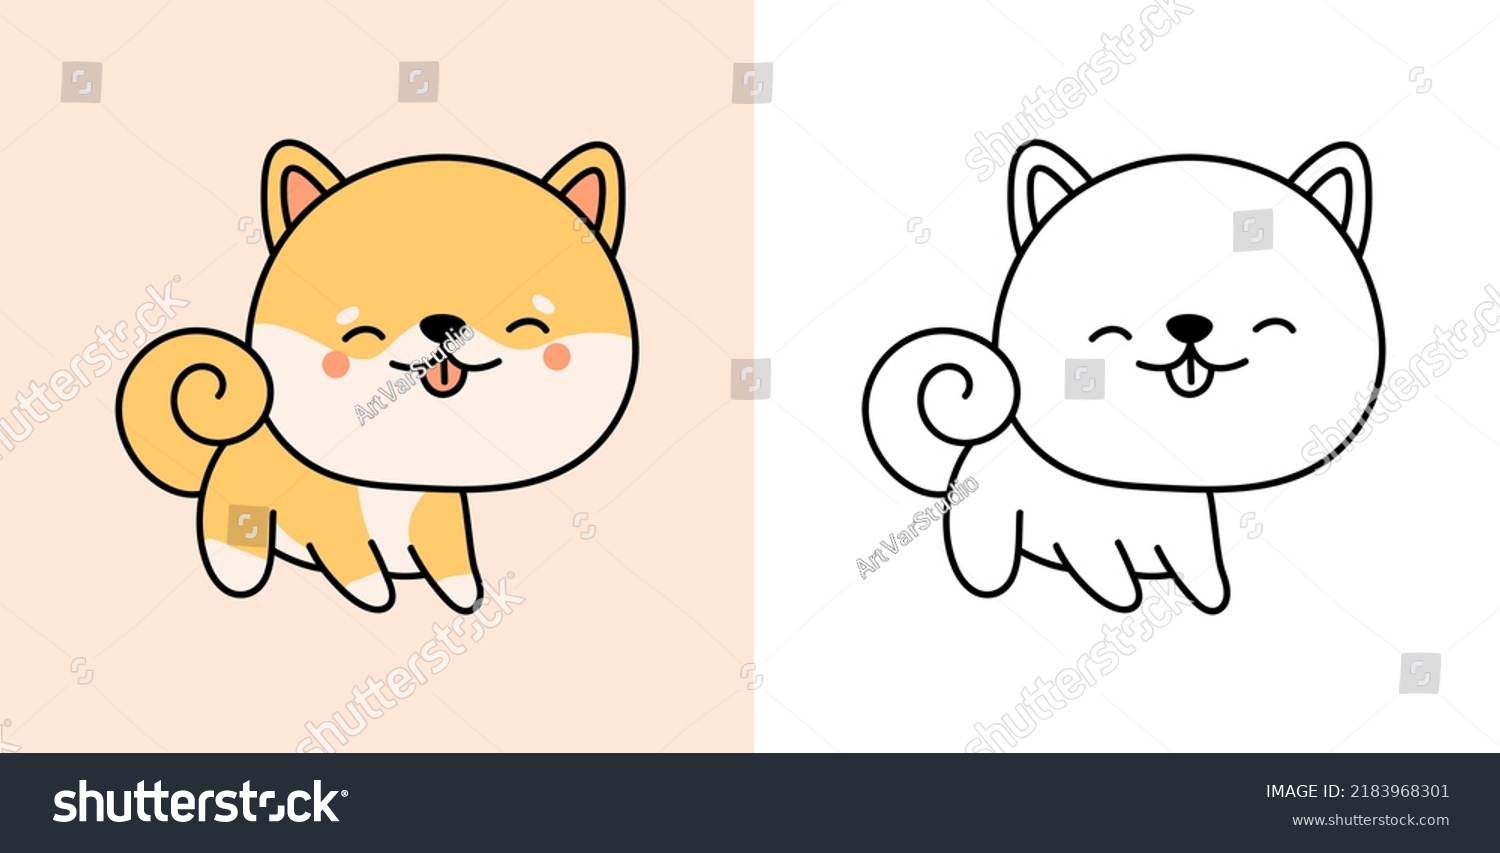 SVG of Shiba Inu Clipart Multicolored and Black and White.  Beautiful Clip Art Shiba Dog. Vector Illustration of a Kawaii Shiba Inu Puppy for Prints for Clothes, Stickers, Baby Shower, Coloring Pages.
 svg